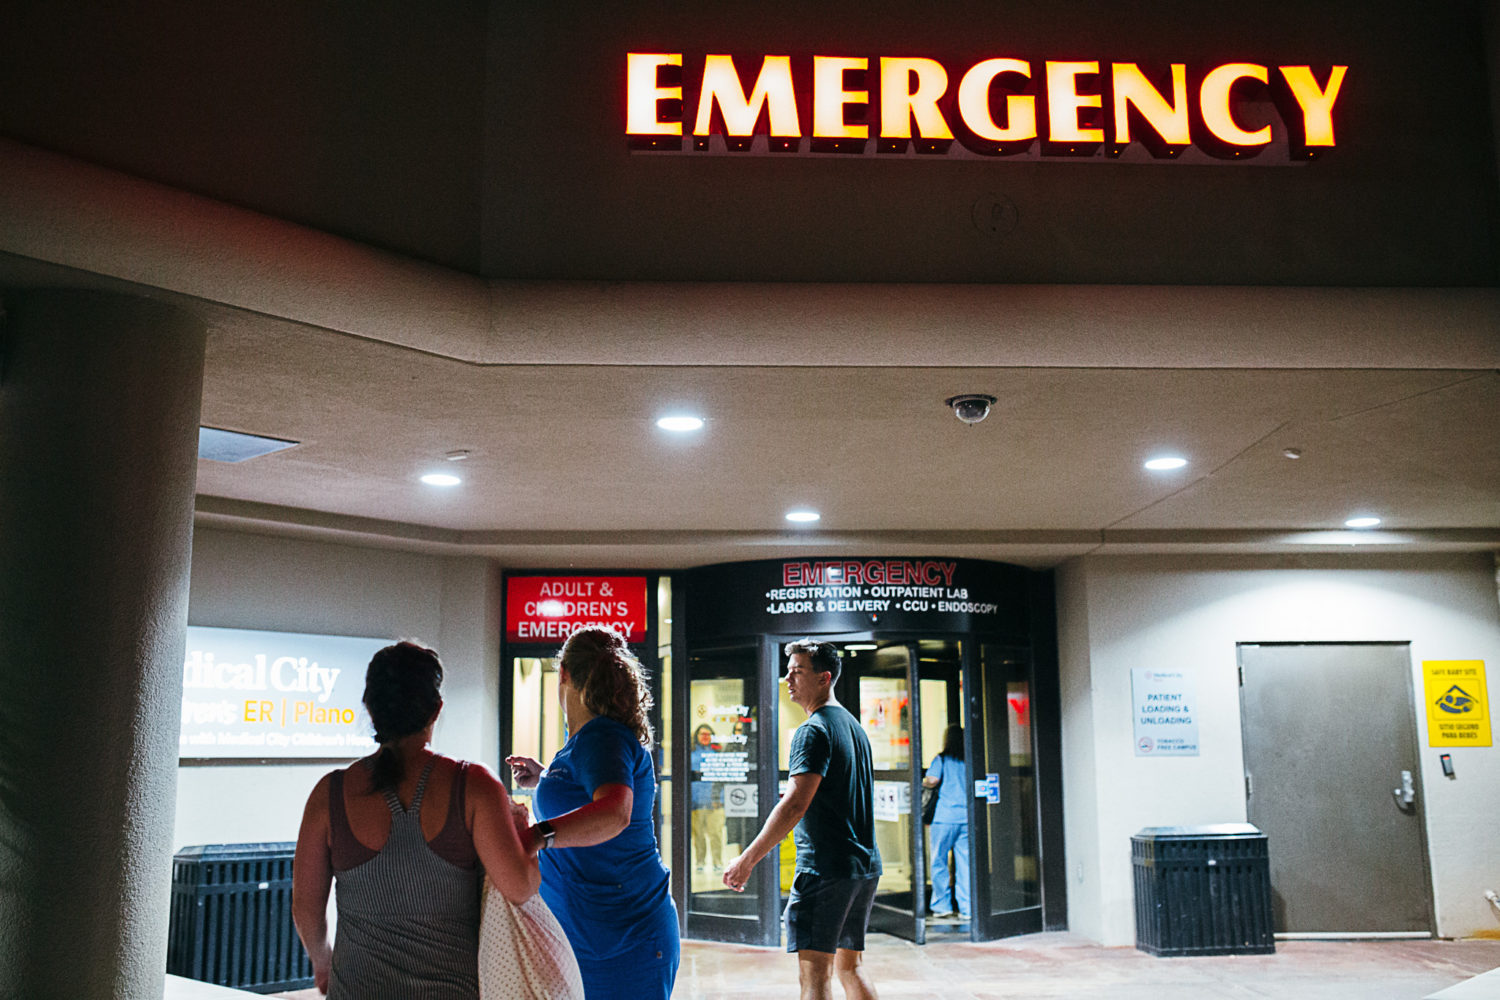 mother and father walking into emergency room while mother is in labor